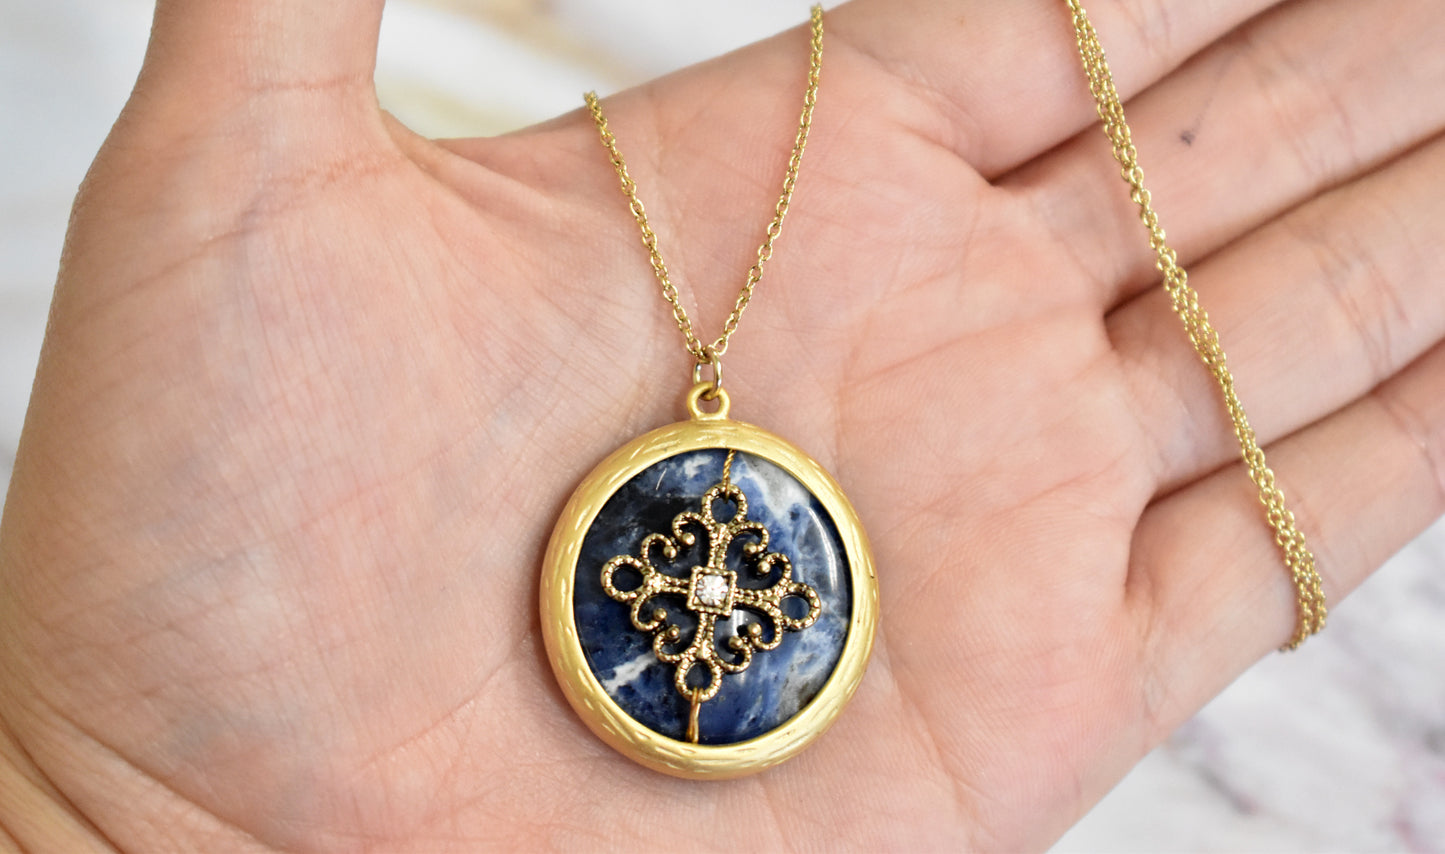 stones-of-transformation - Sodalite Necklace - Stones of Transformation - 